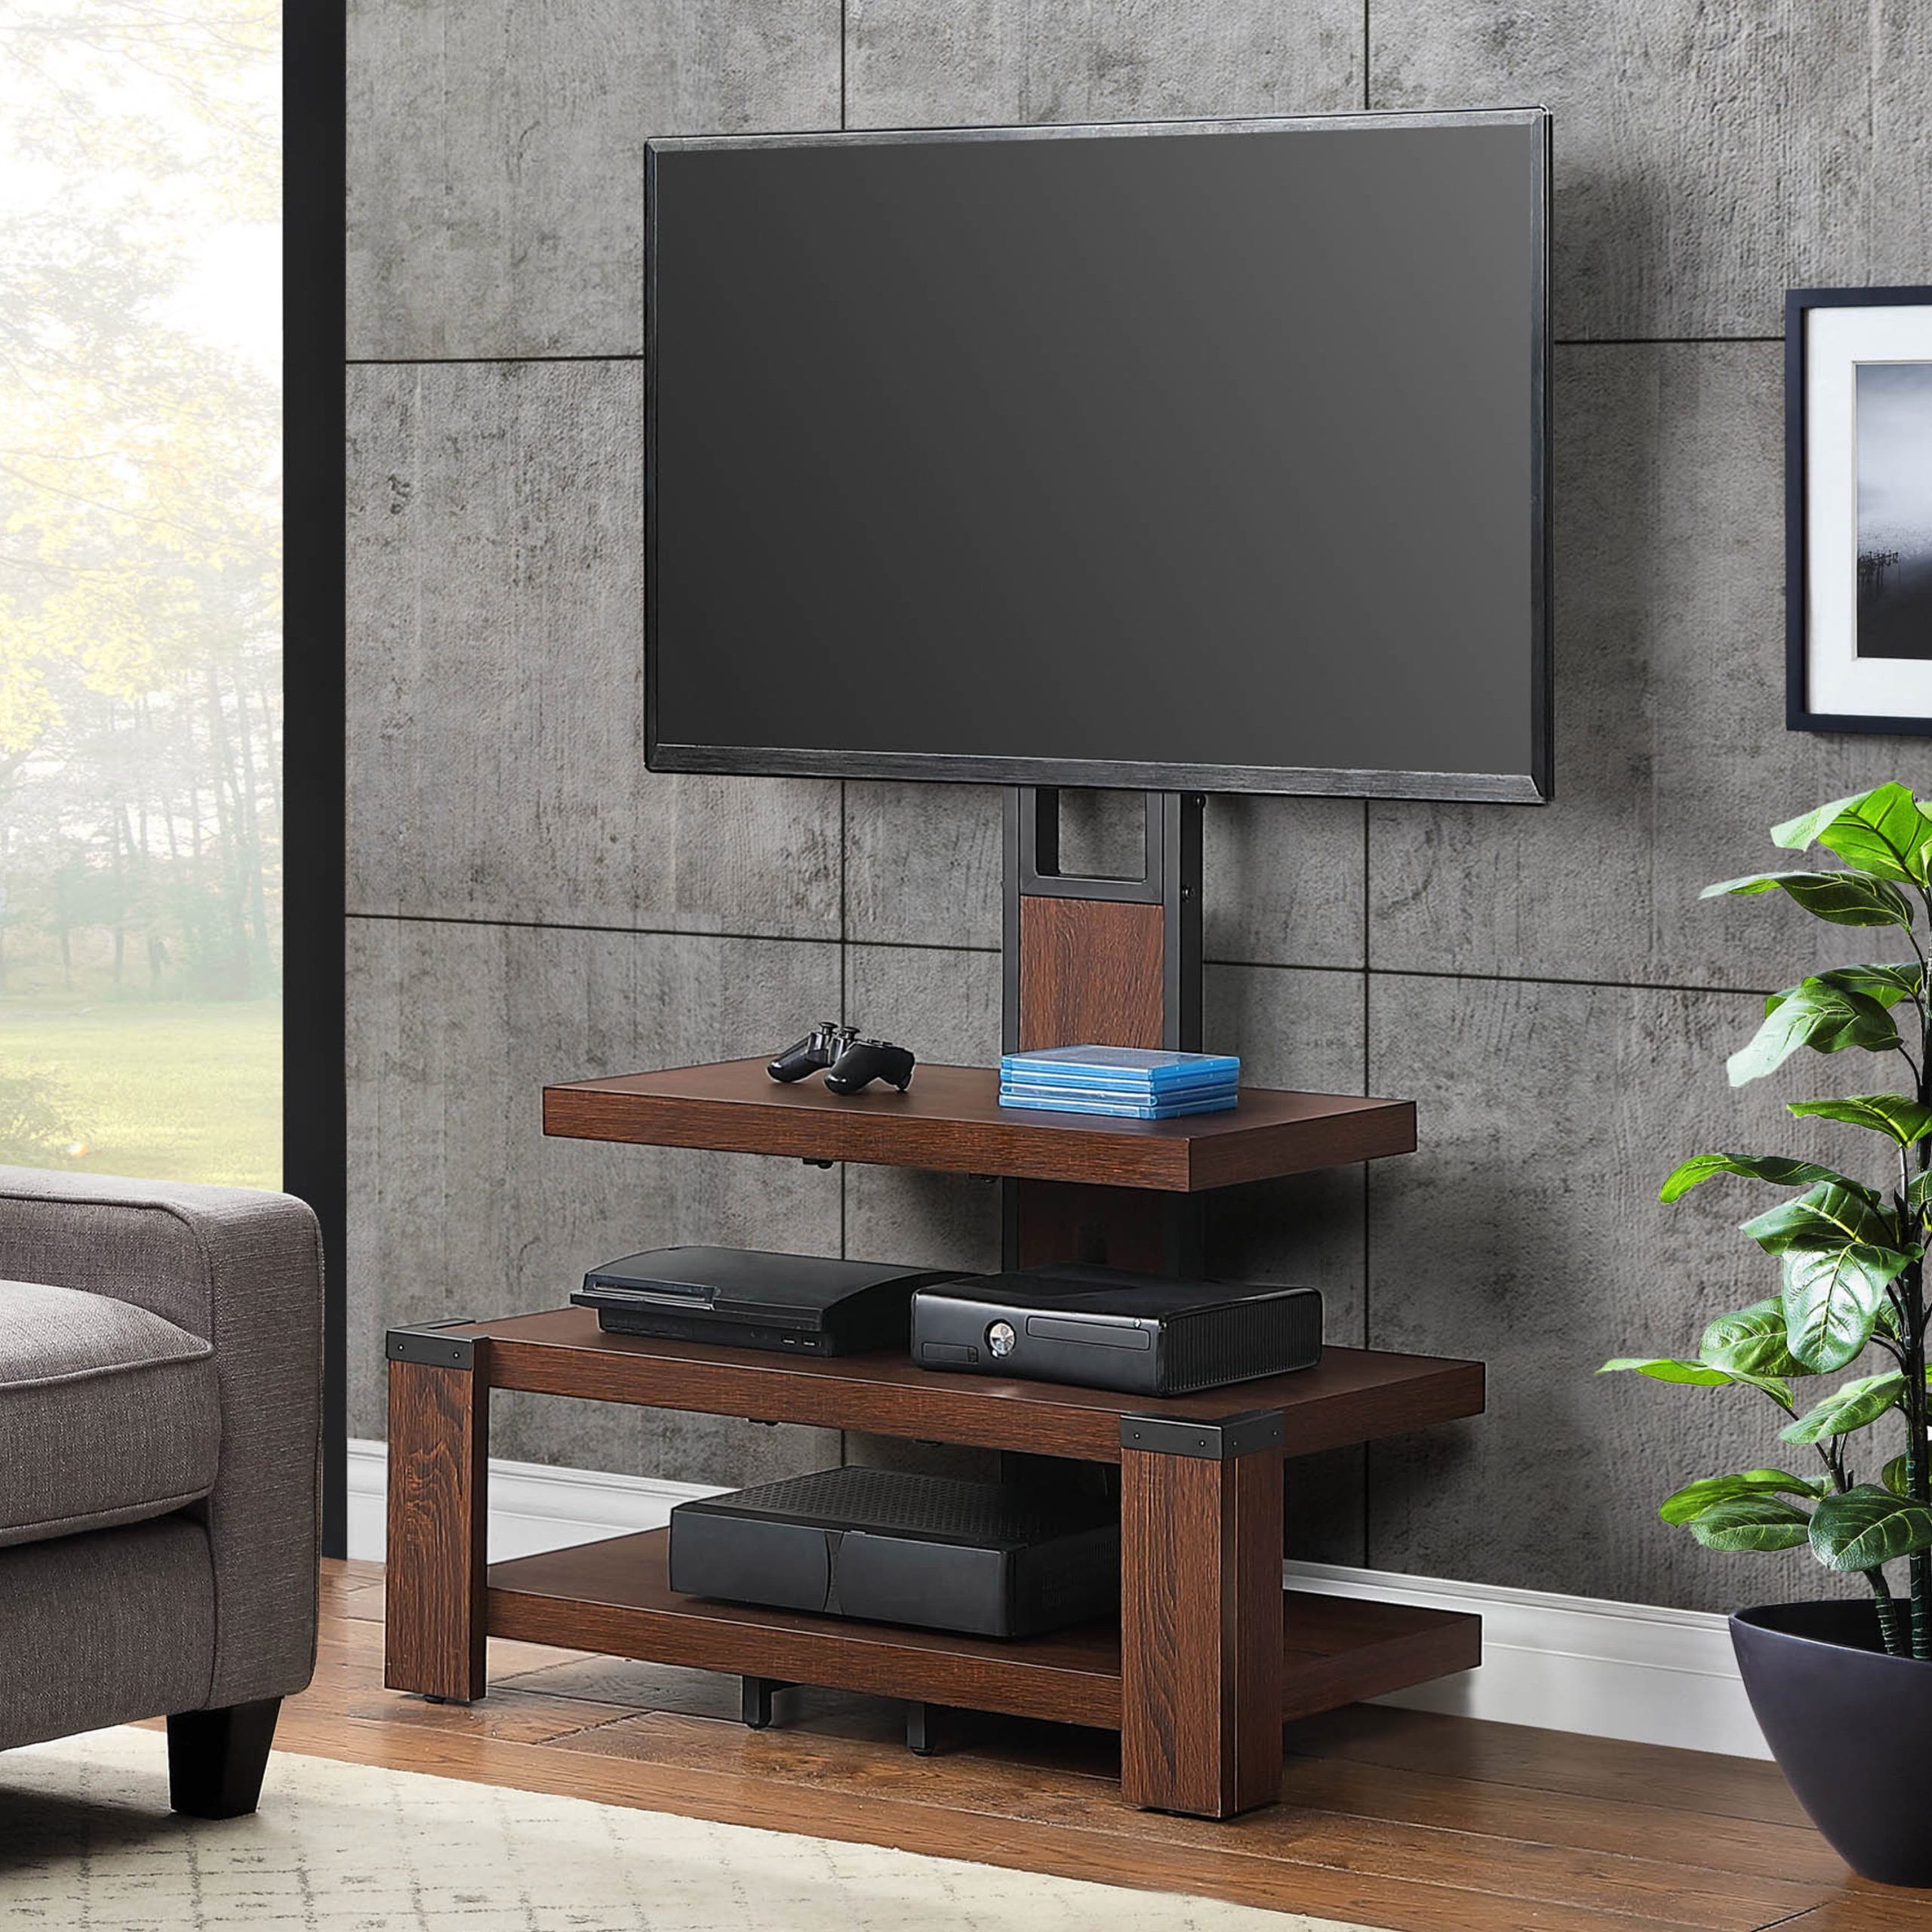 Most Popular Top Shelf Mount Tv Stands In Whalen 3 Shelf Television Stand With Floater Mount For Tvs Up To 55 (Photo 1 of 15)